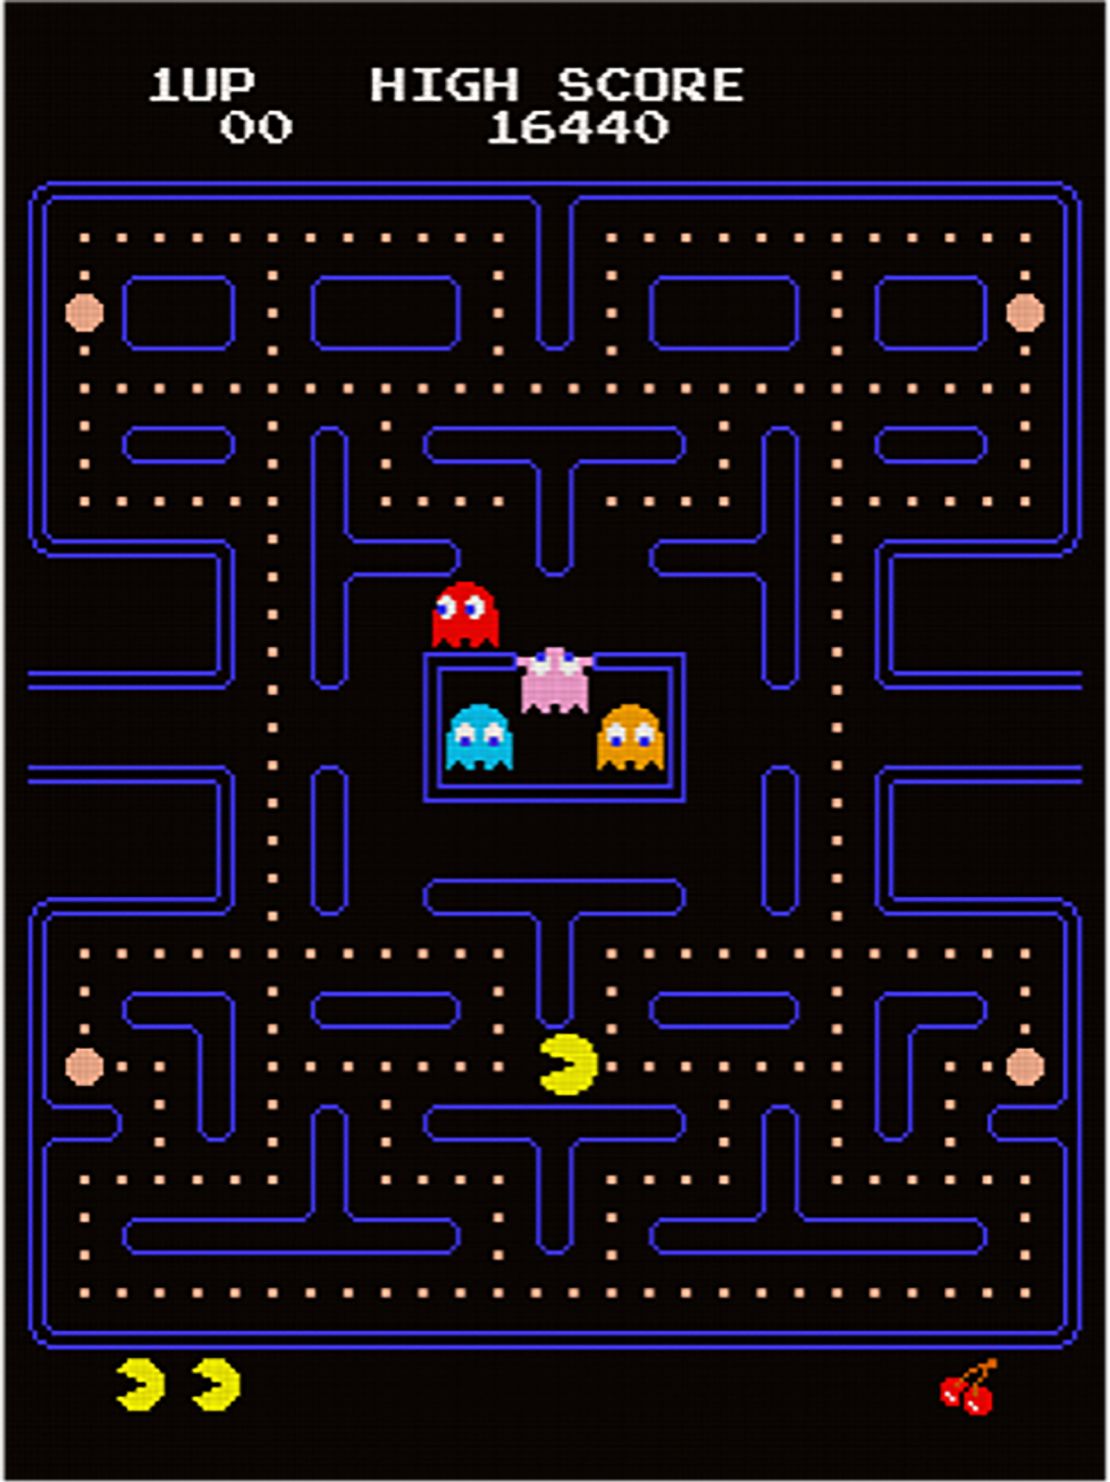 "Pac-Man" is the most successful arcade game of all time.